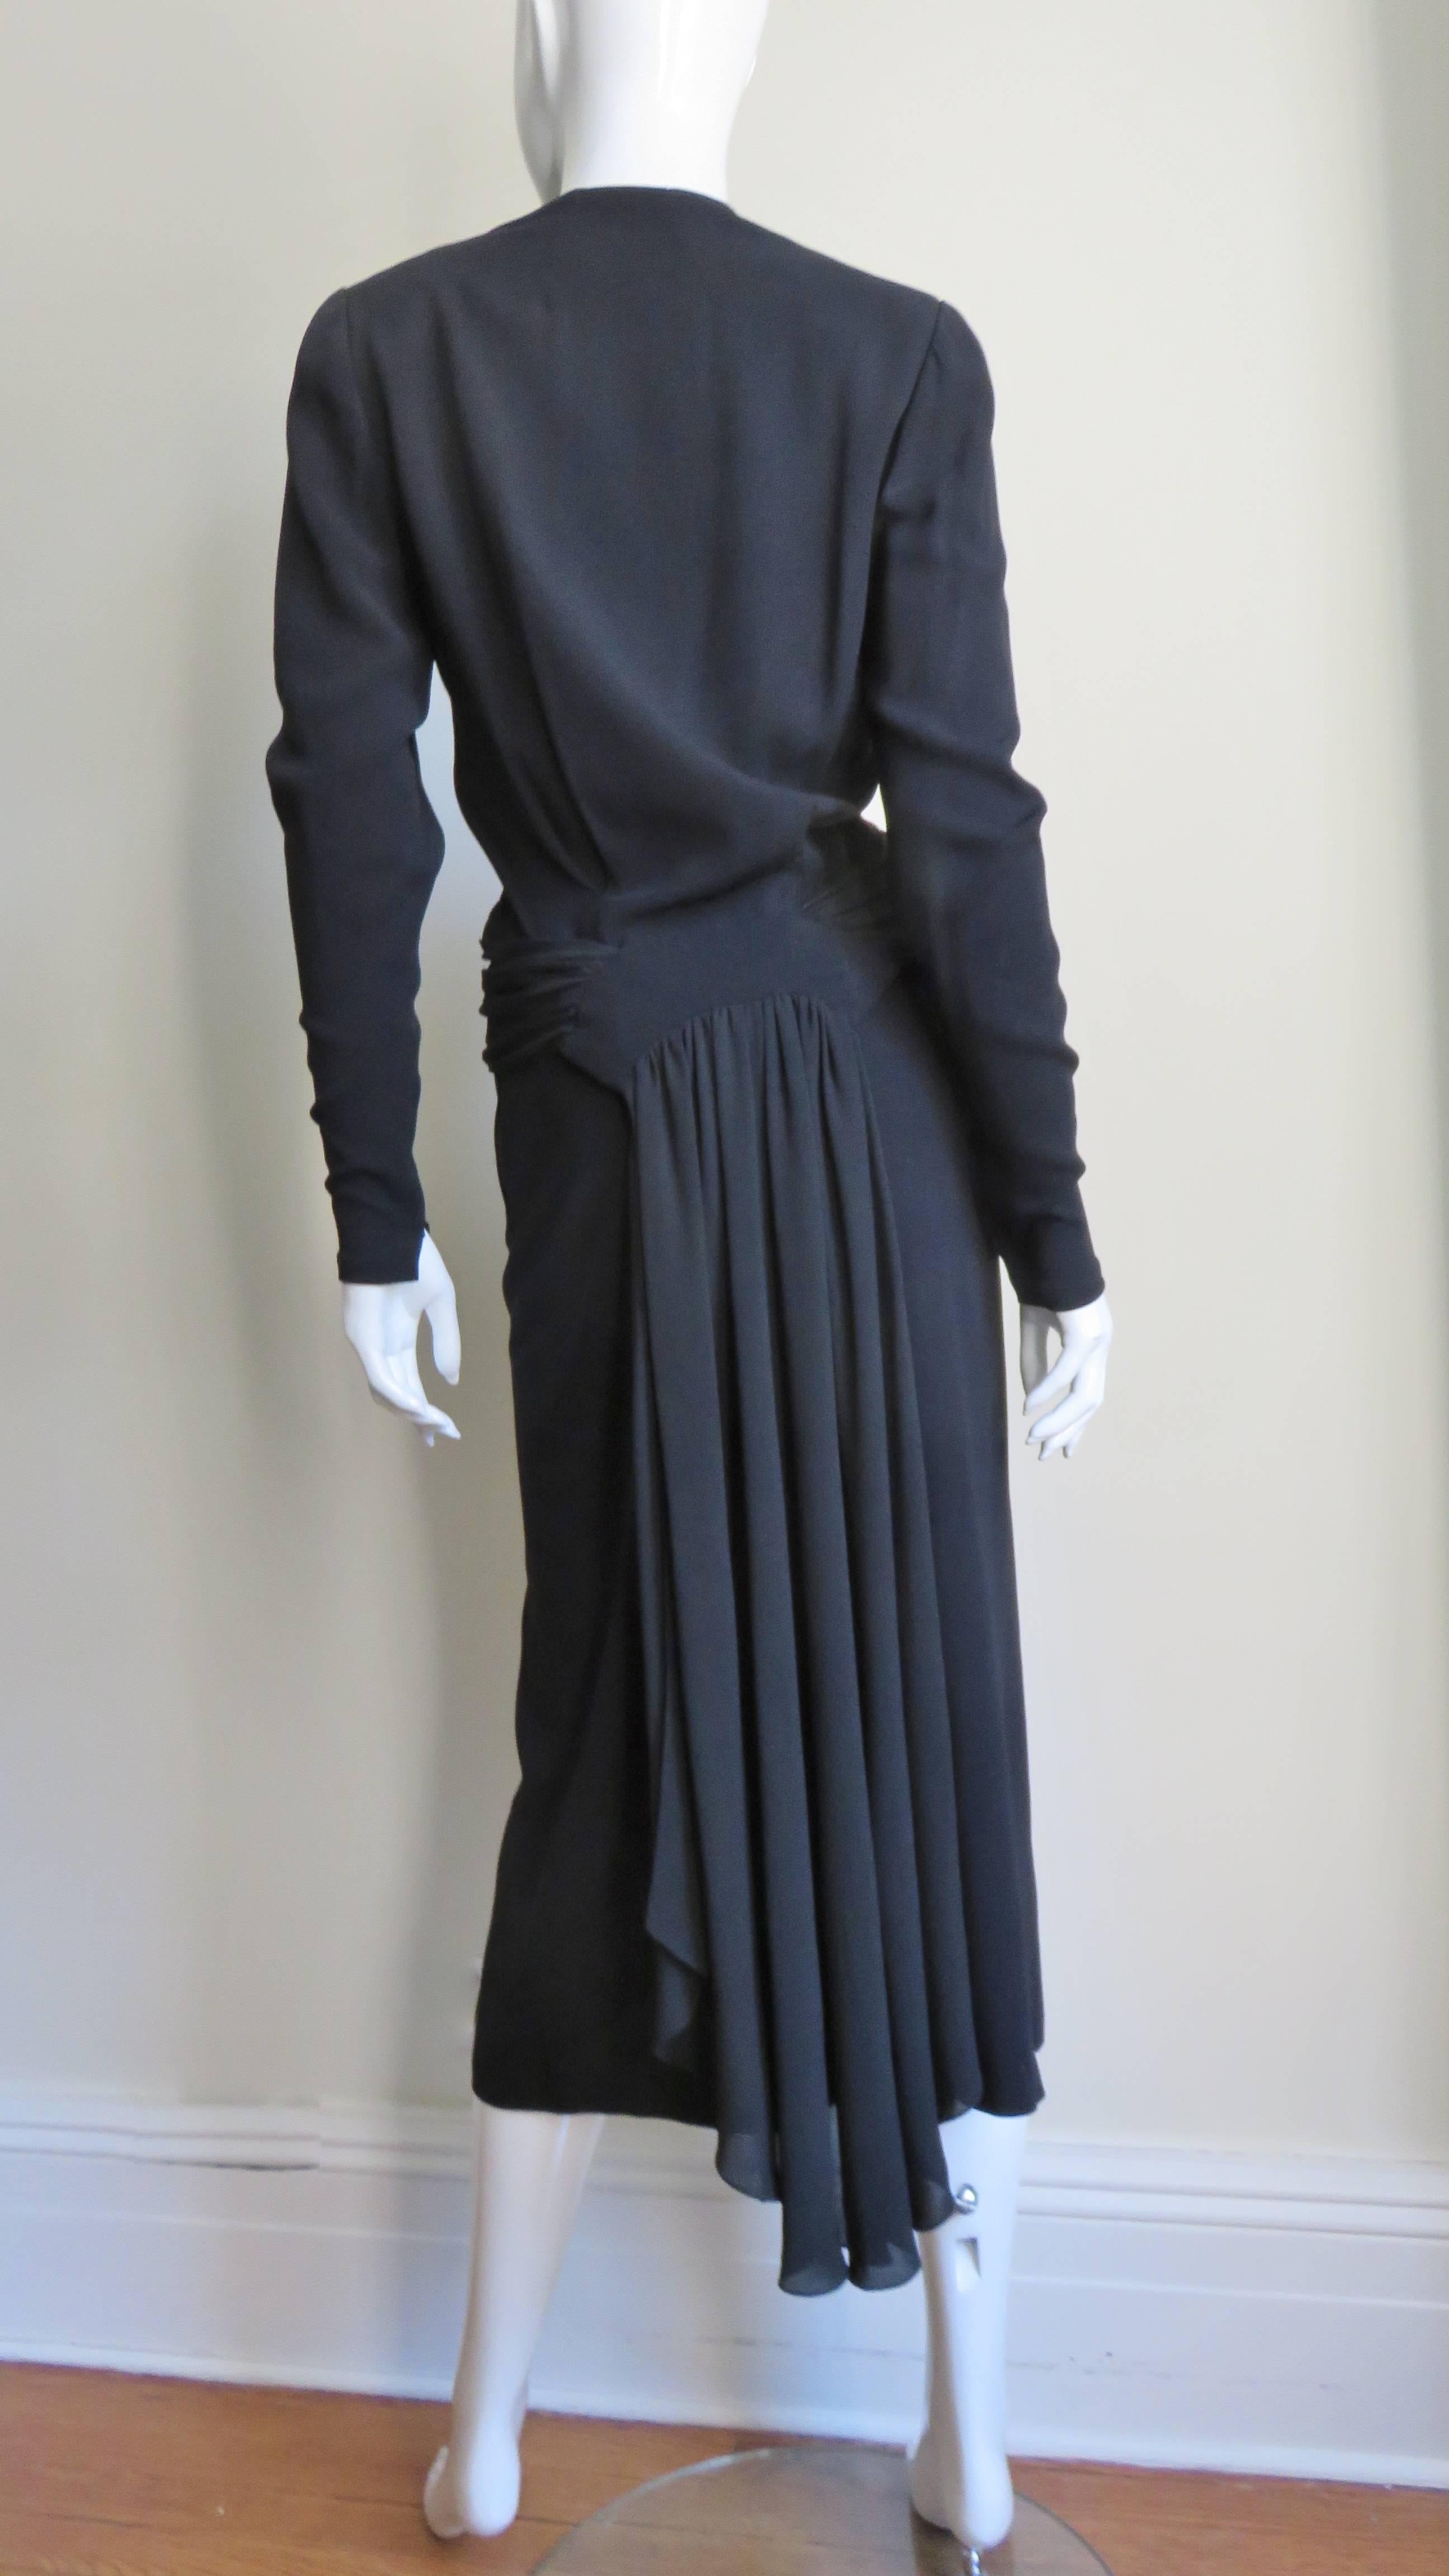 Edna Vilm Top with Waterfall Back and Skirt 1940s For Sale 6